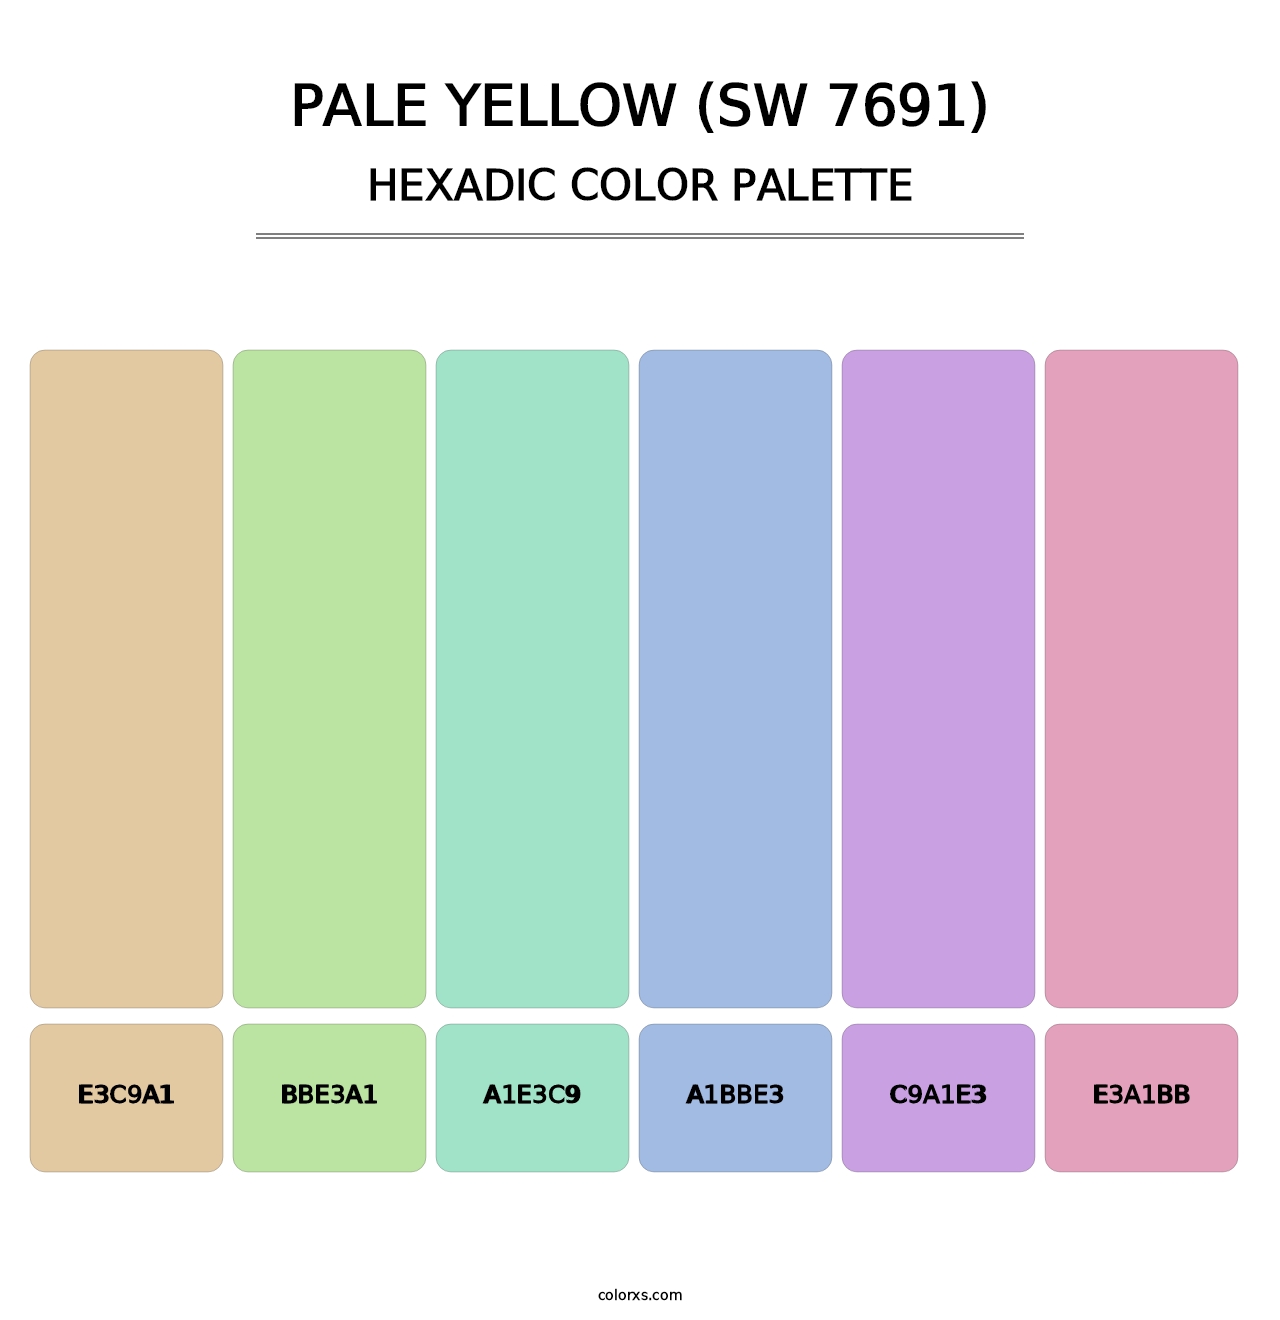 Pale Yellow (SW 7691) - Hexadic Color Palette